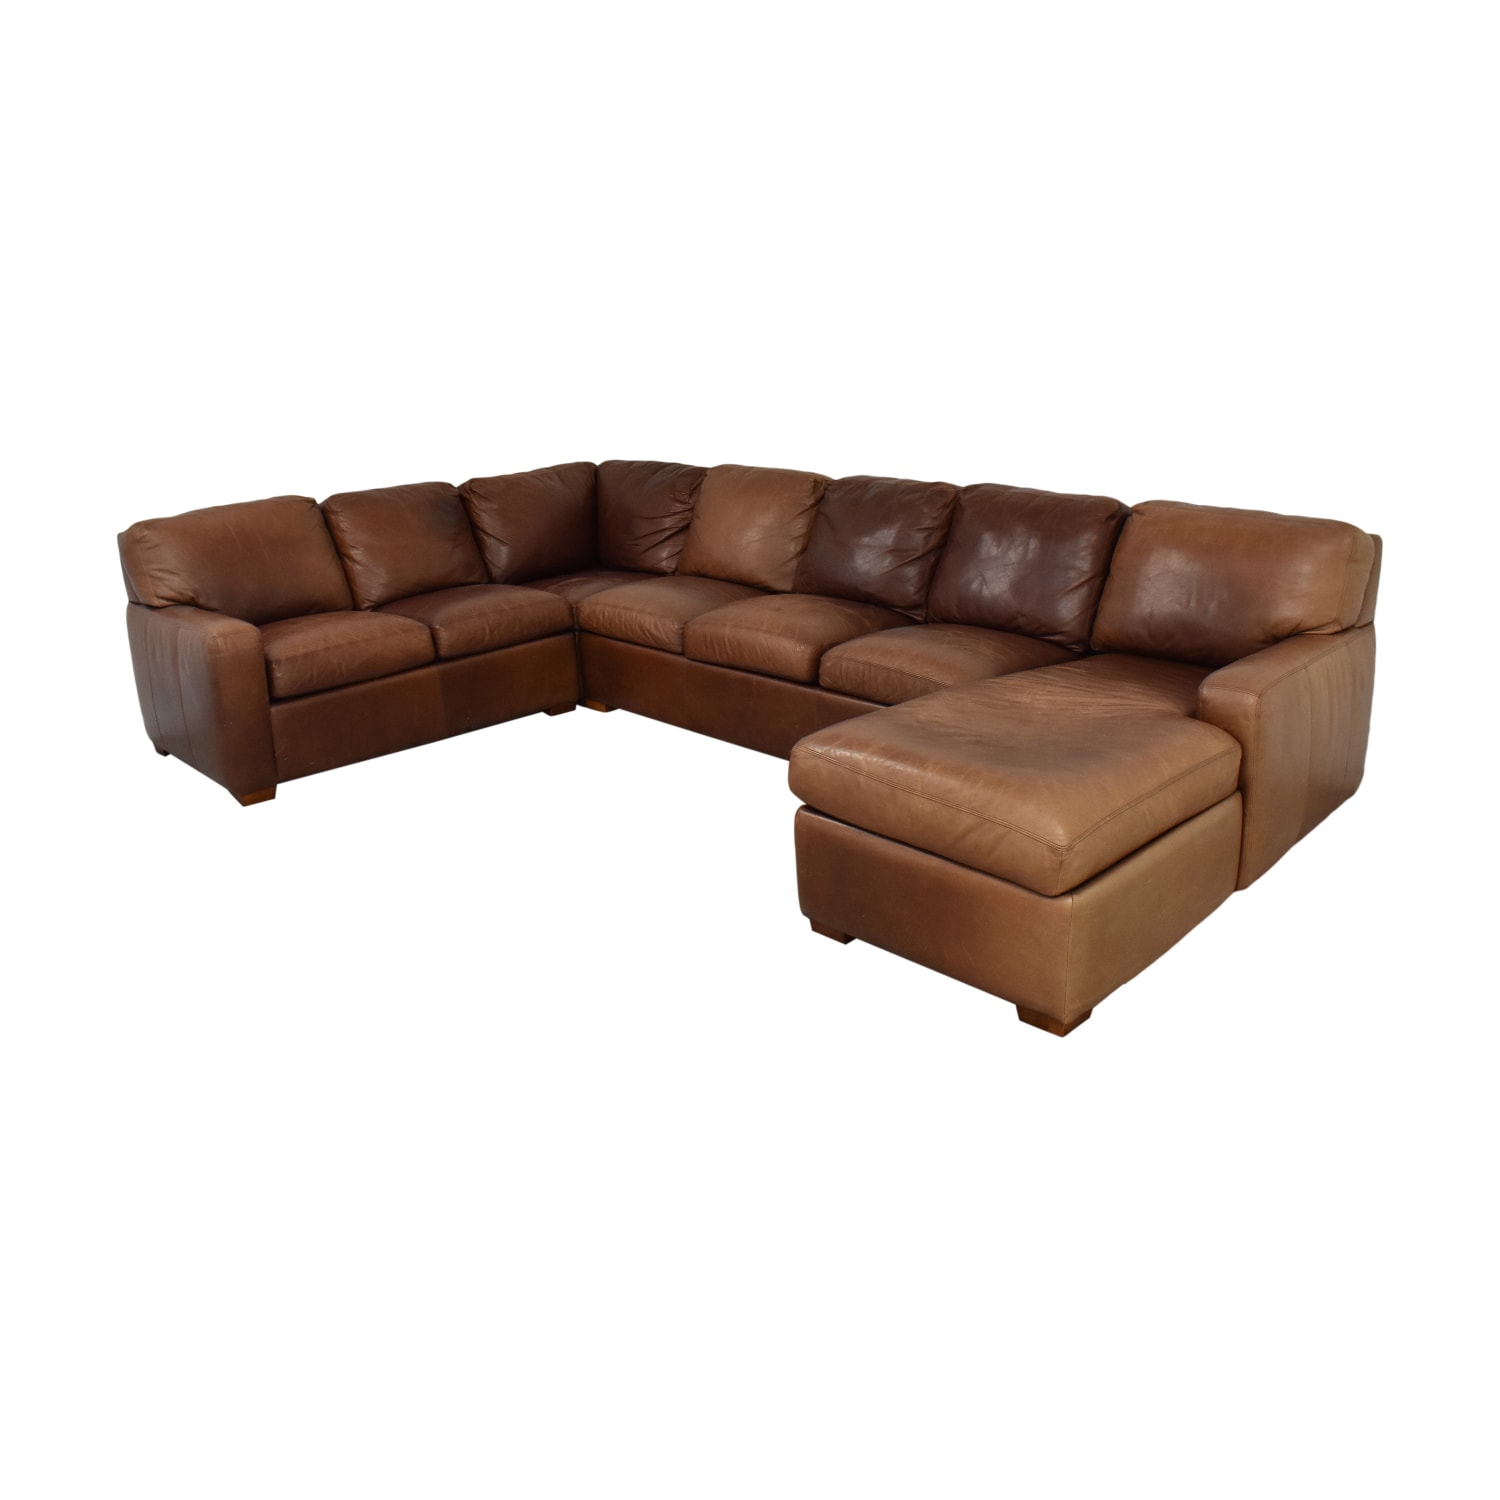 American Leather American Leather Danford Sectional Sofa price